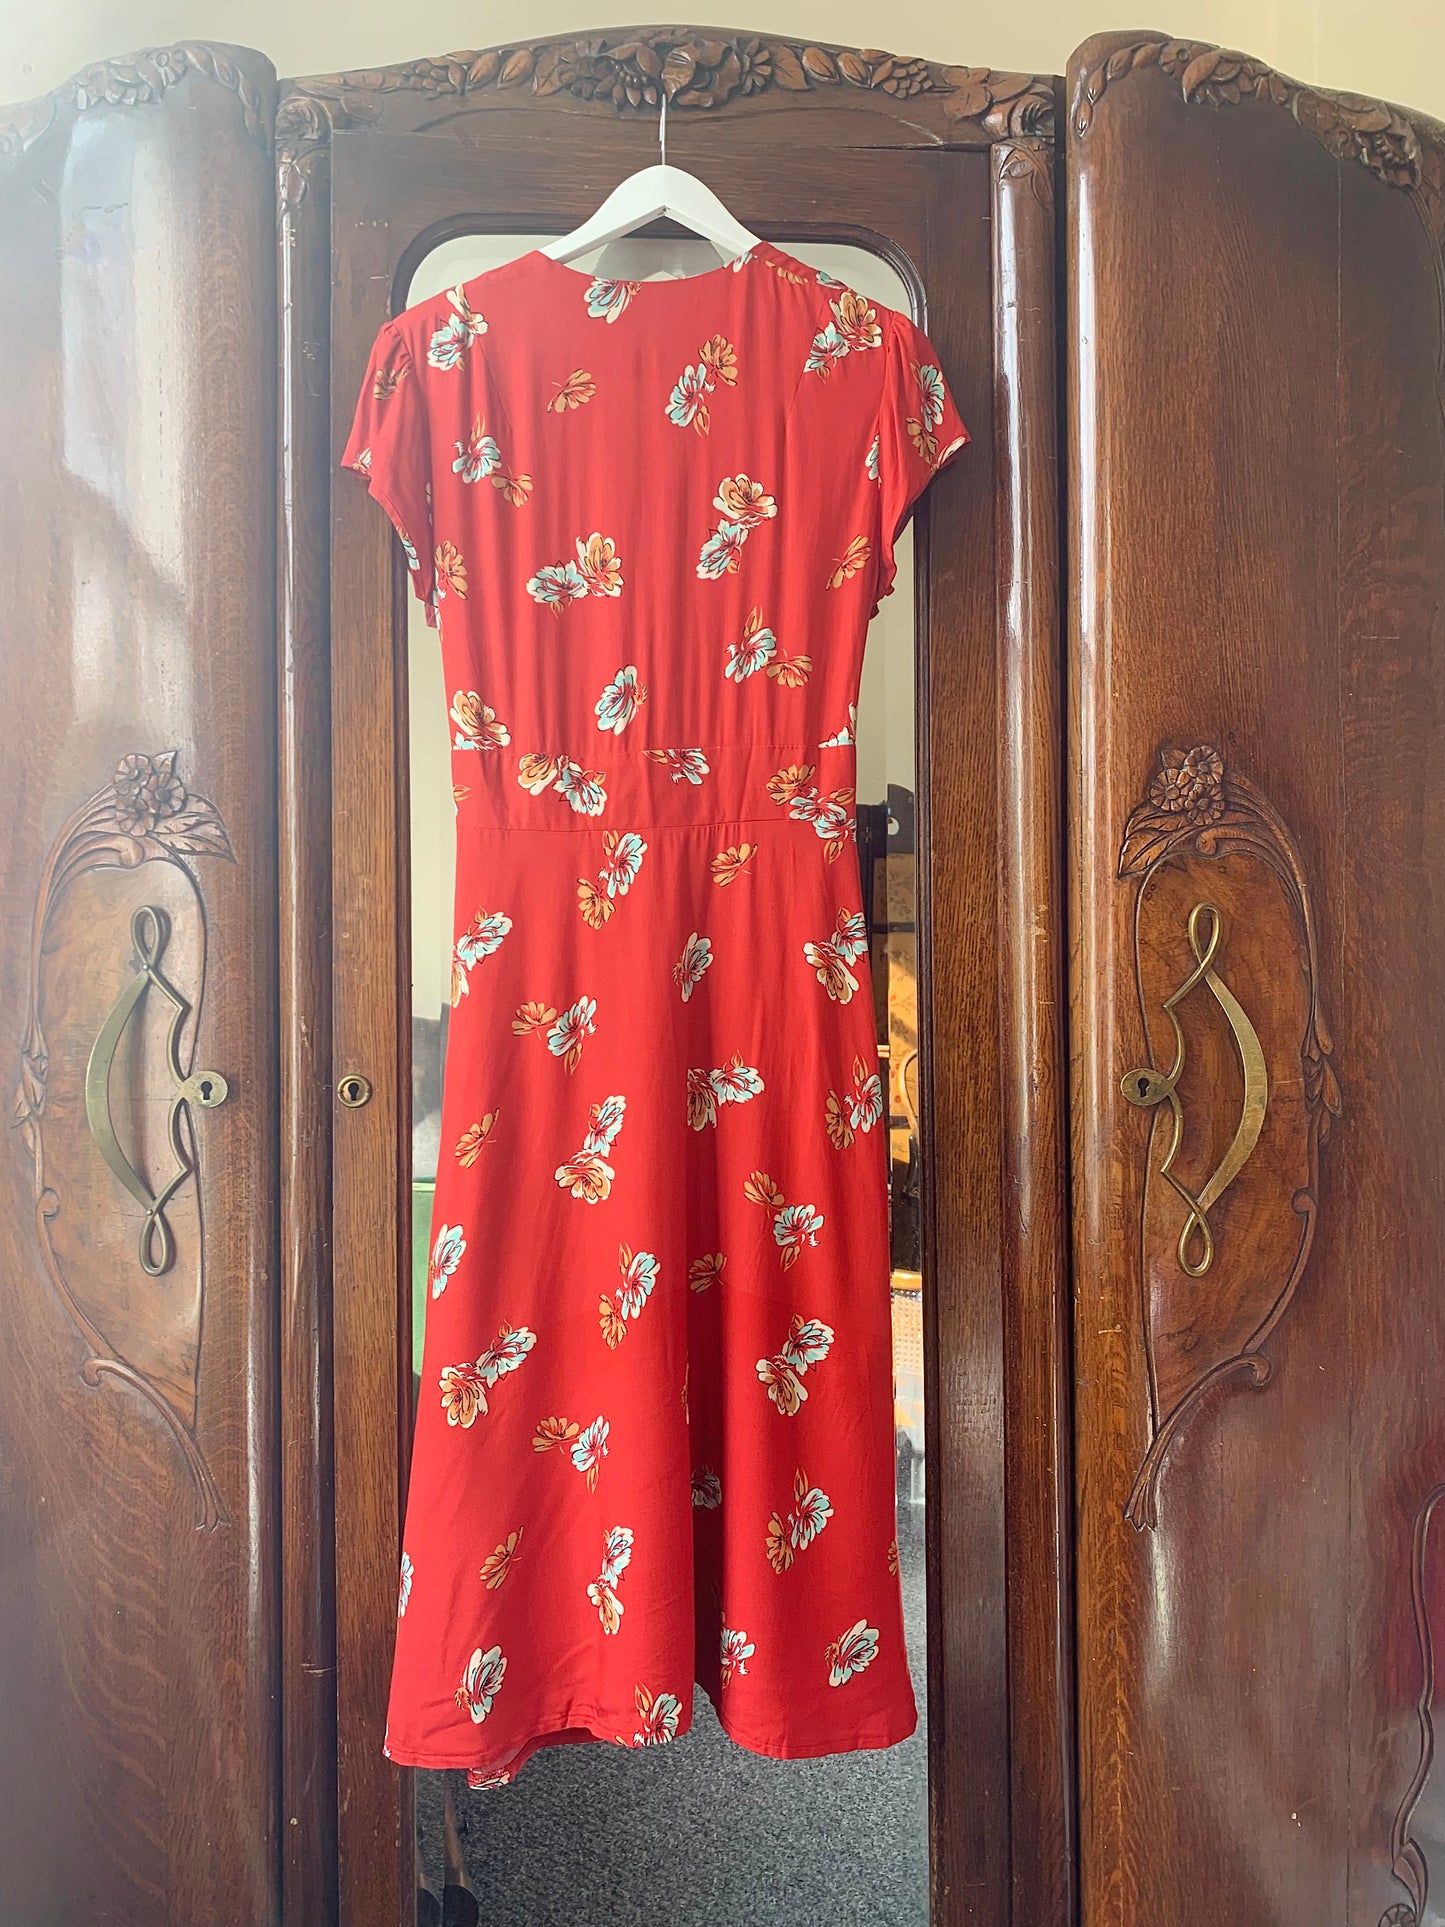 SAMPLE Piccadilly Dress matt red floral 12